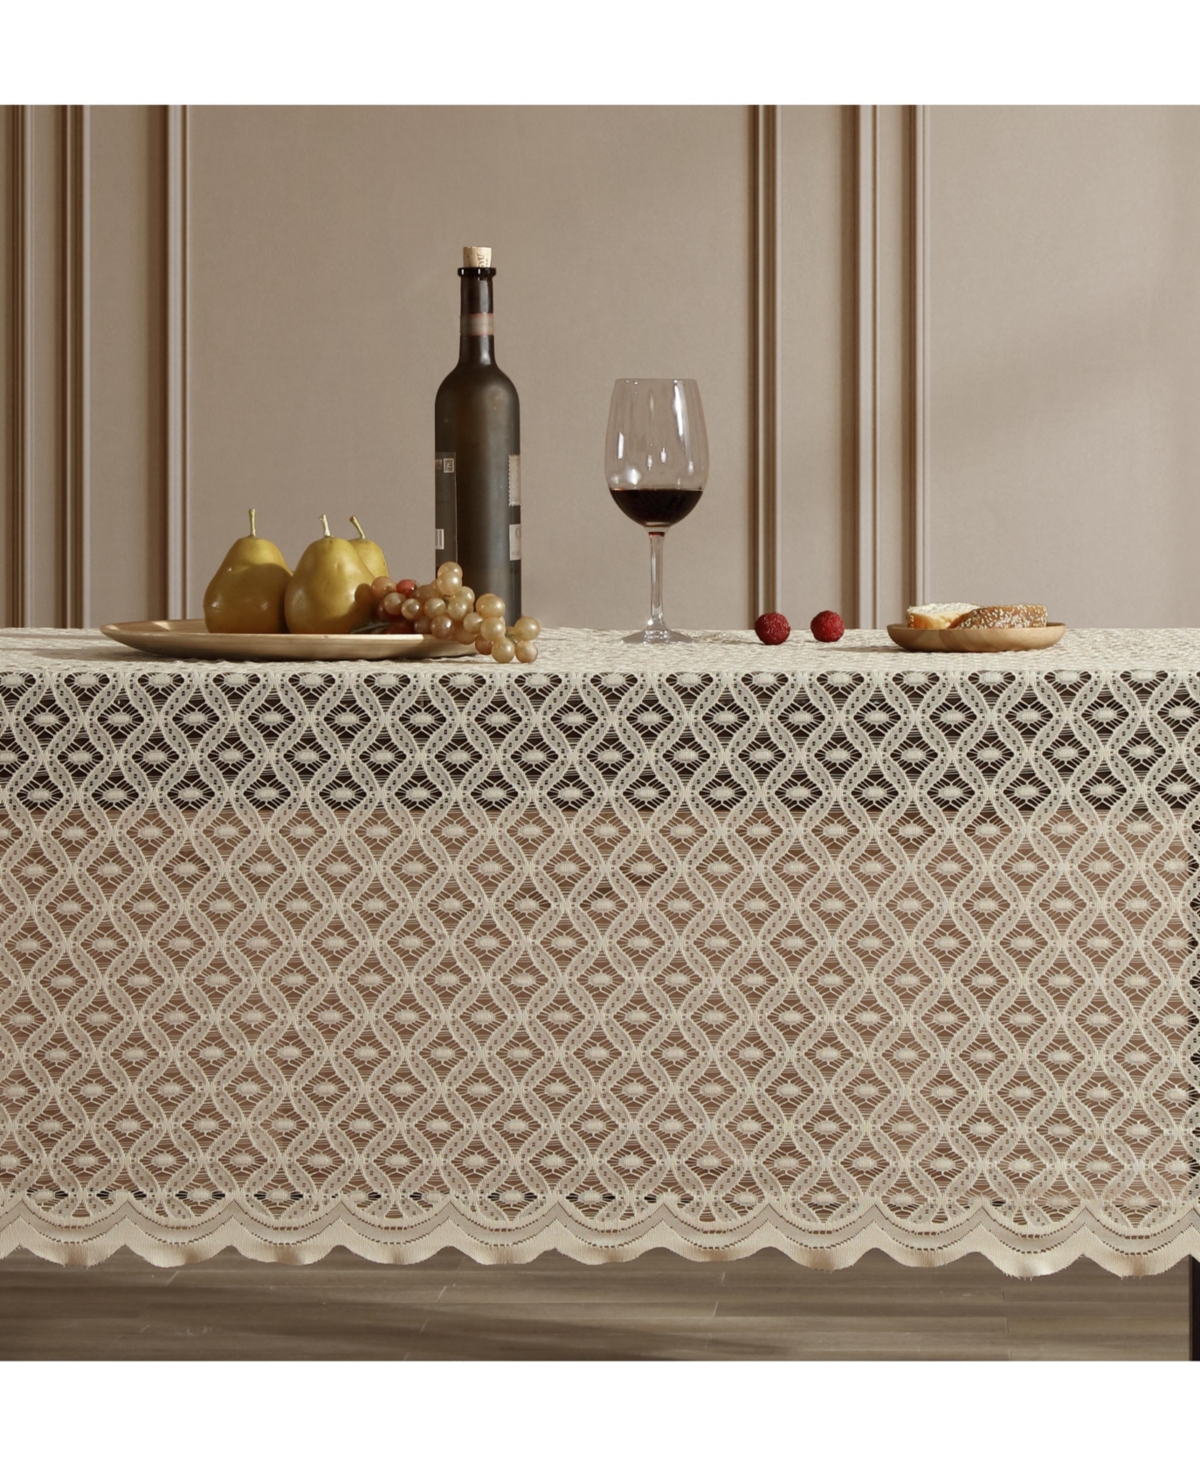 Alona Lace Fabric Table Cloth for Rectangle Tables, Wrinkle Resistant Tablecloth, Patterned Scalloped - Linen taupe